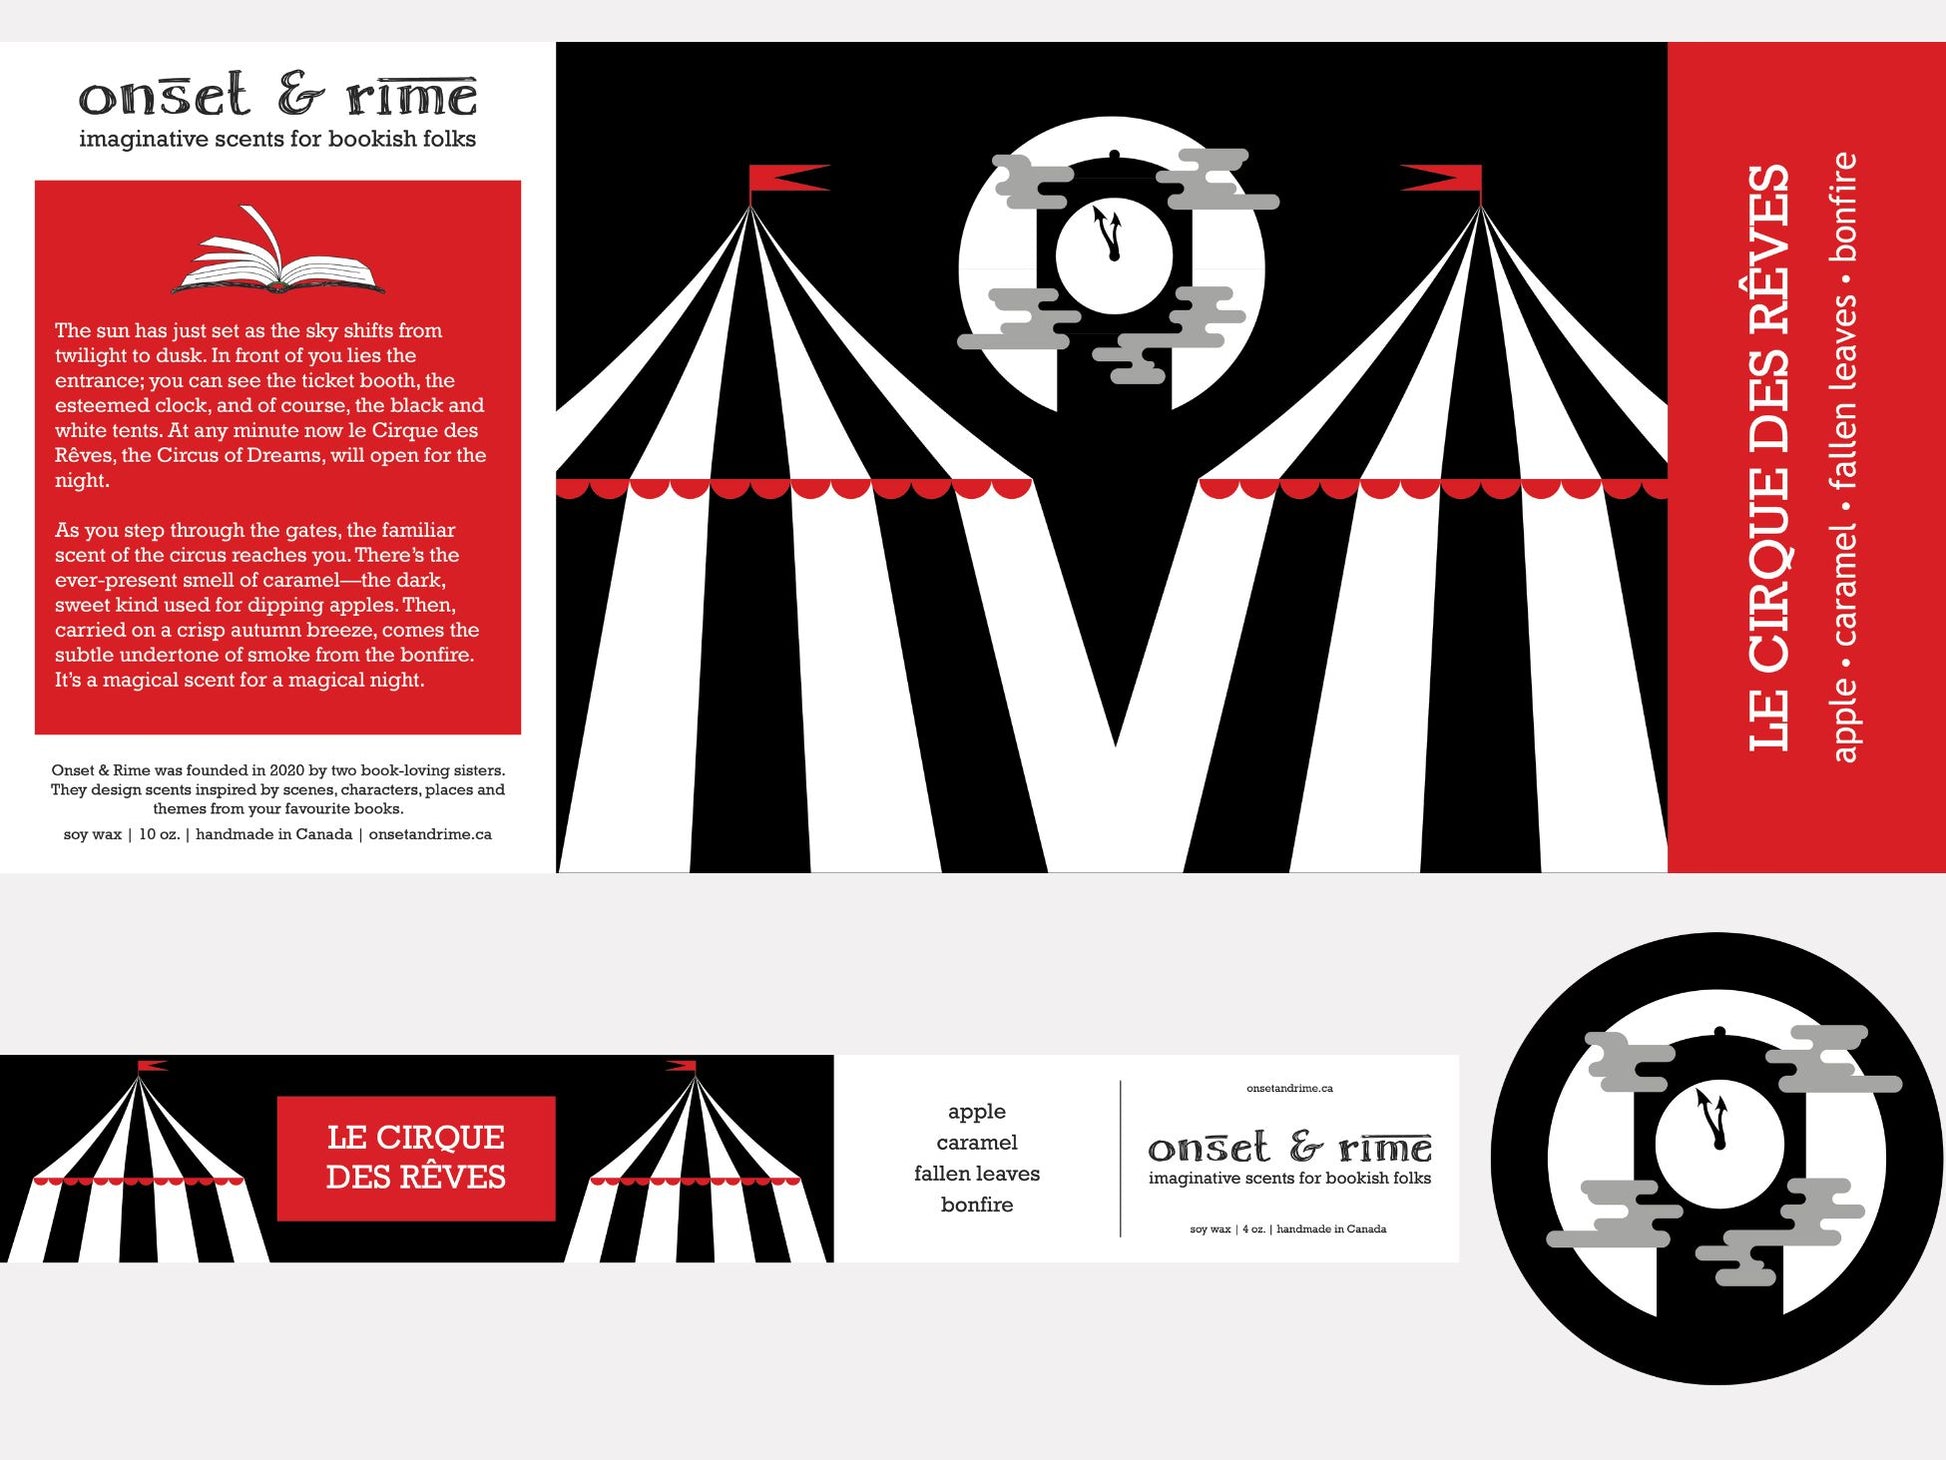 A close up view of the label for the Onset & Rime caramel apple and fall air scented candle called "Le Cirque des Rêves". The label has a black background with black and white circus tents and a clock in front of a full moon. The text on the label is "Le Cirque des Rêves - Apple, Caramel, Fallen Leaves, Bonfire".